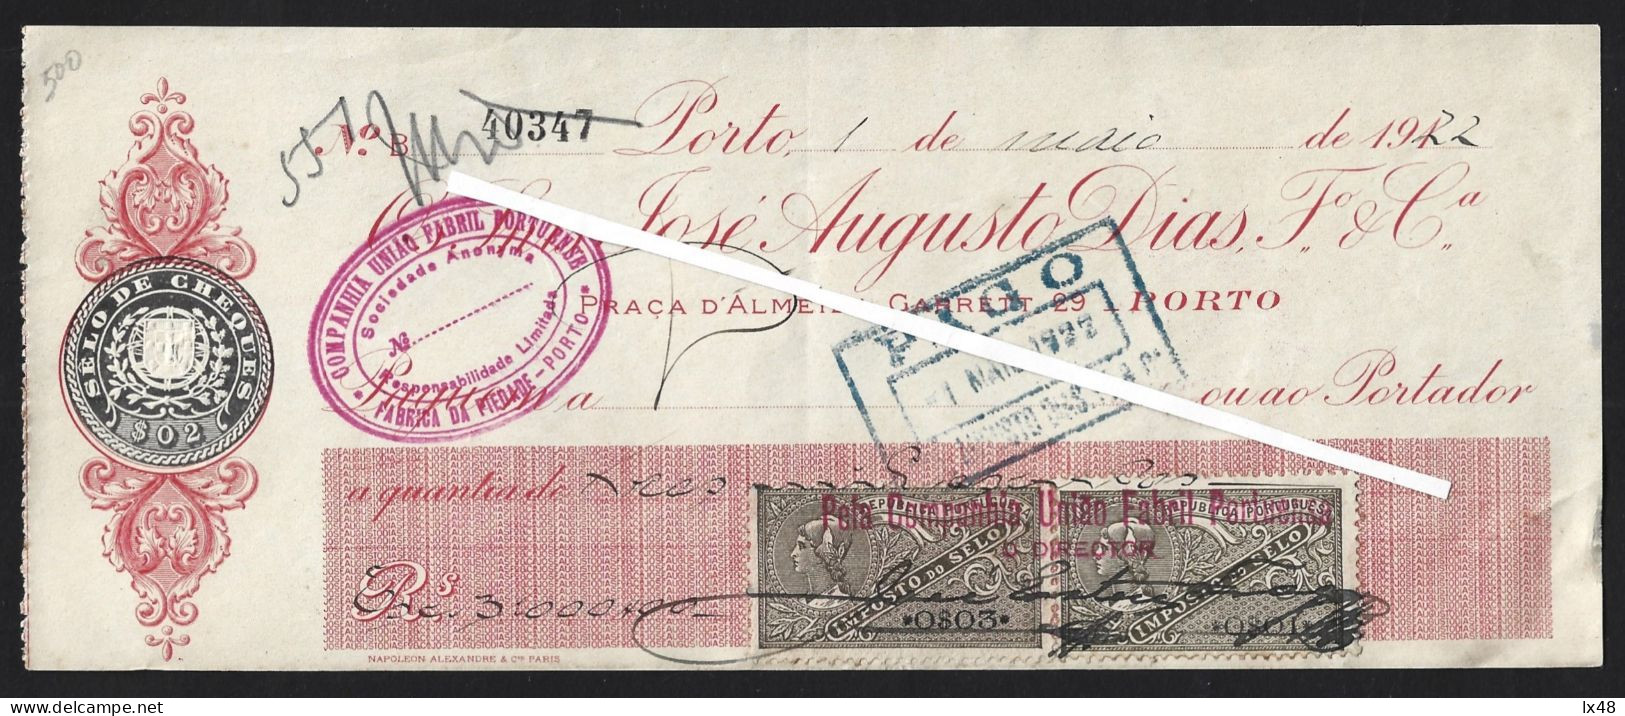 Check From José Augusto Dias Fº Banking House 1910. Check In Réis From CUF, Porto. Check Stamp $02 With Additional Fees. - Chèques & Chèques De Voyage